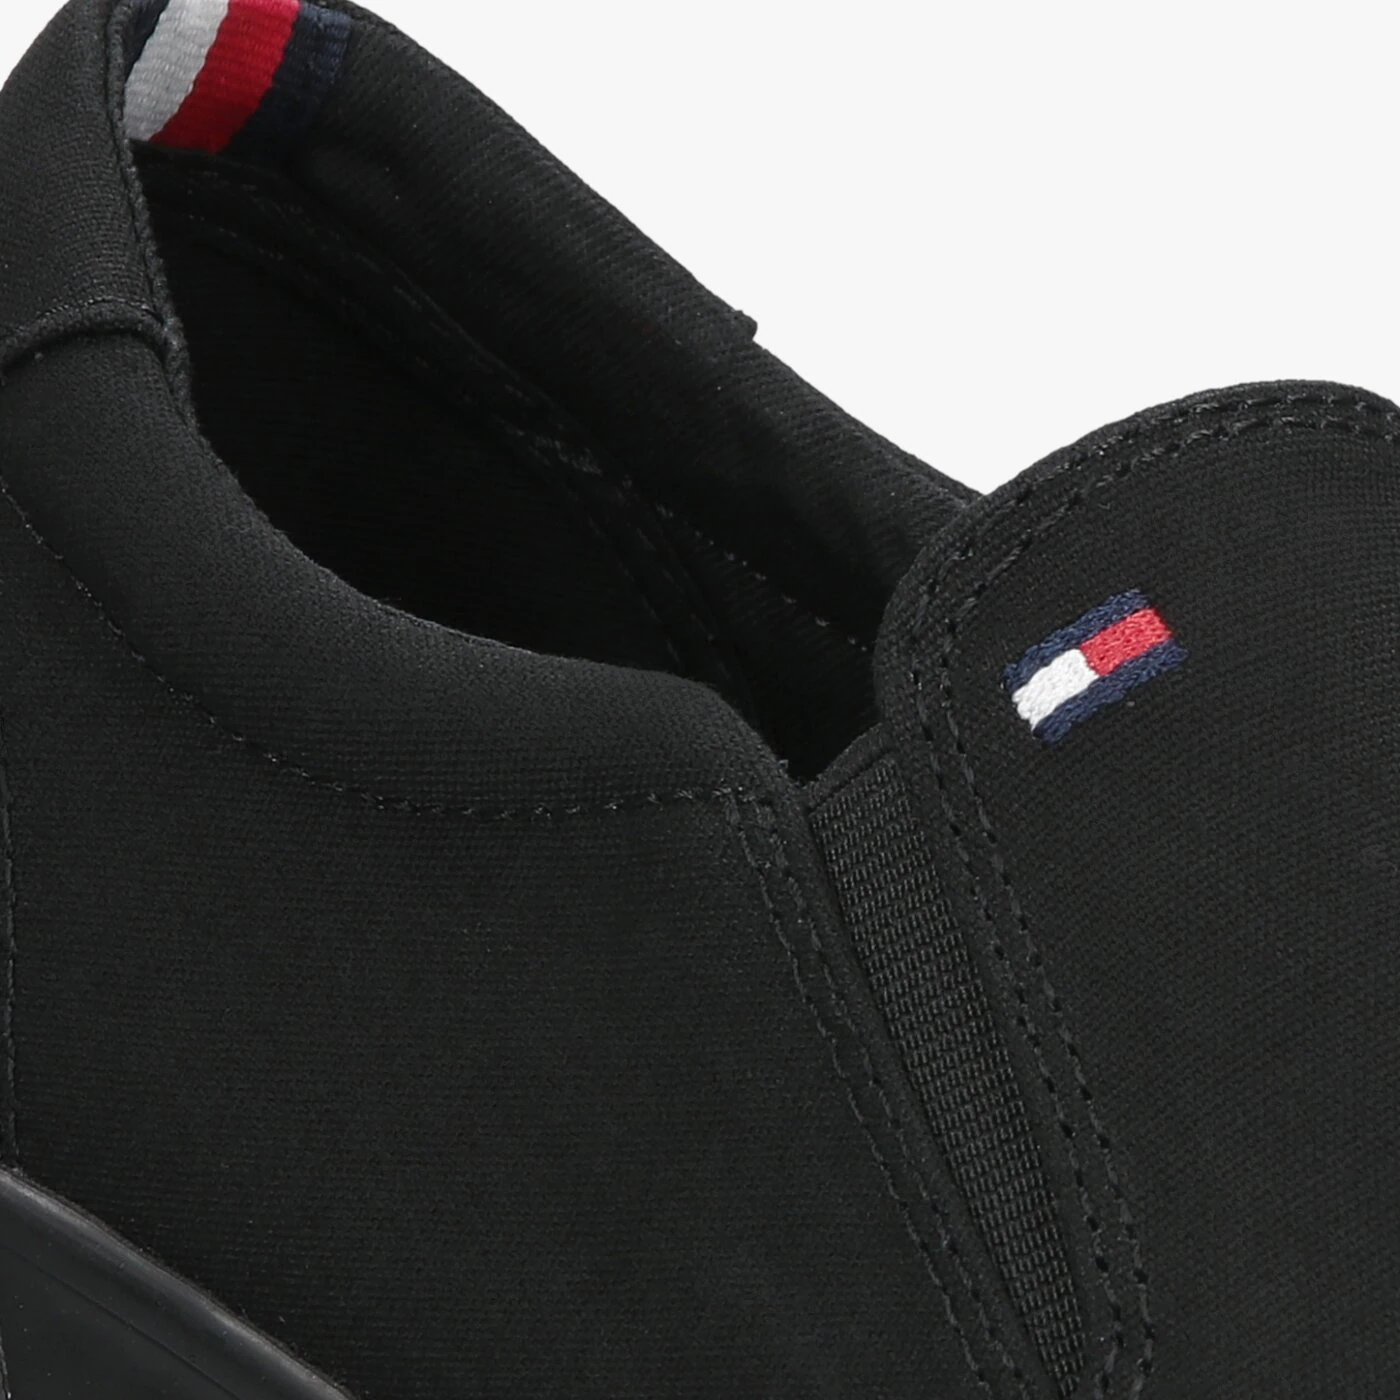 TOMMY HILFIGER ICONIC SLIP ON SNEAKER